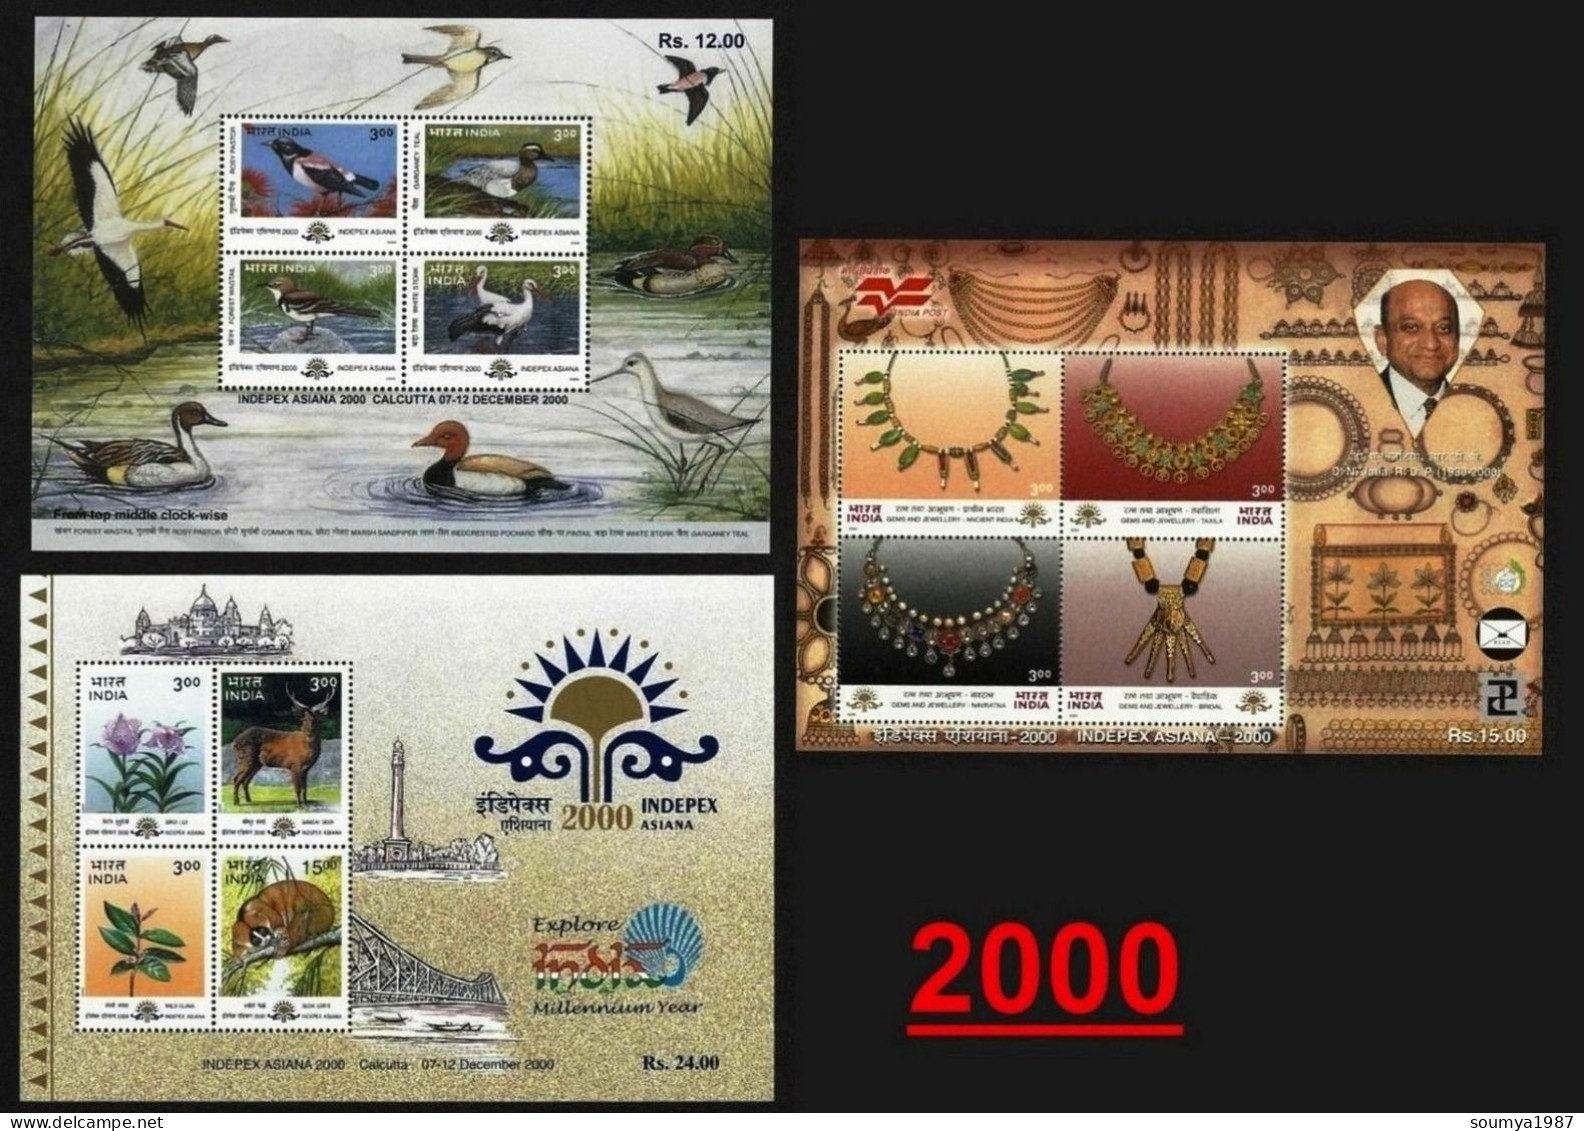 INDIA 2000 COMPLETE YEAR PACK OF MINIATURE SHEETS CONTAINS 3 MS OF FLOWERS, ANIMALS, BIRDS, JUALARY, INDIPEX MS MNH - Nuevos